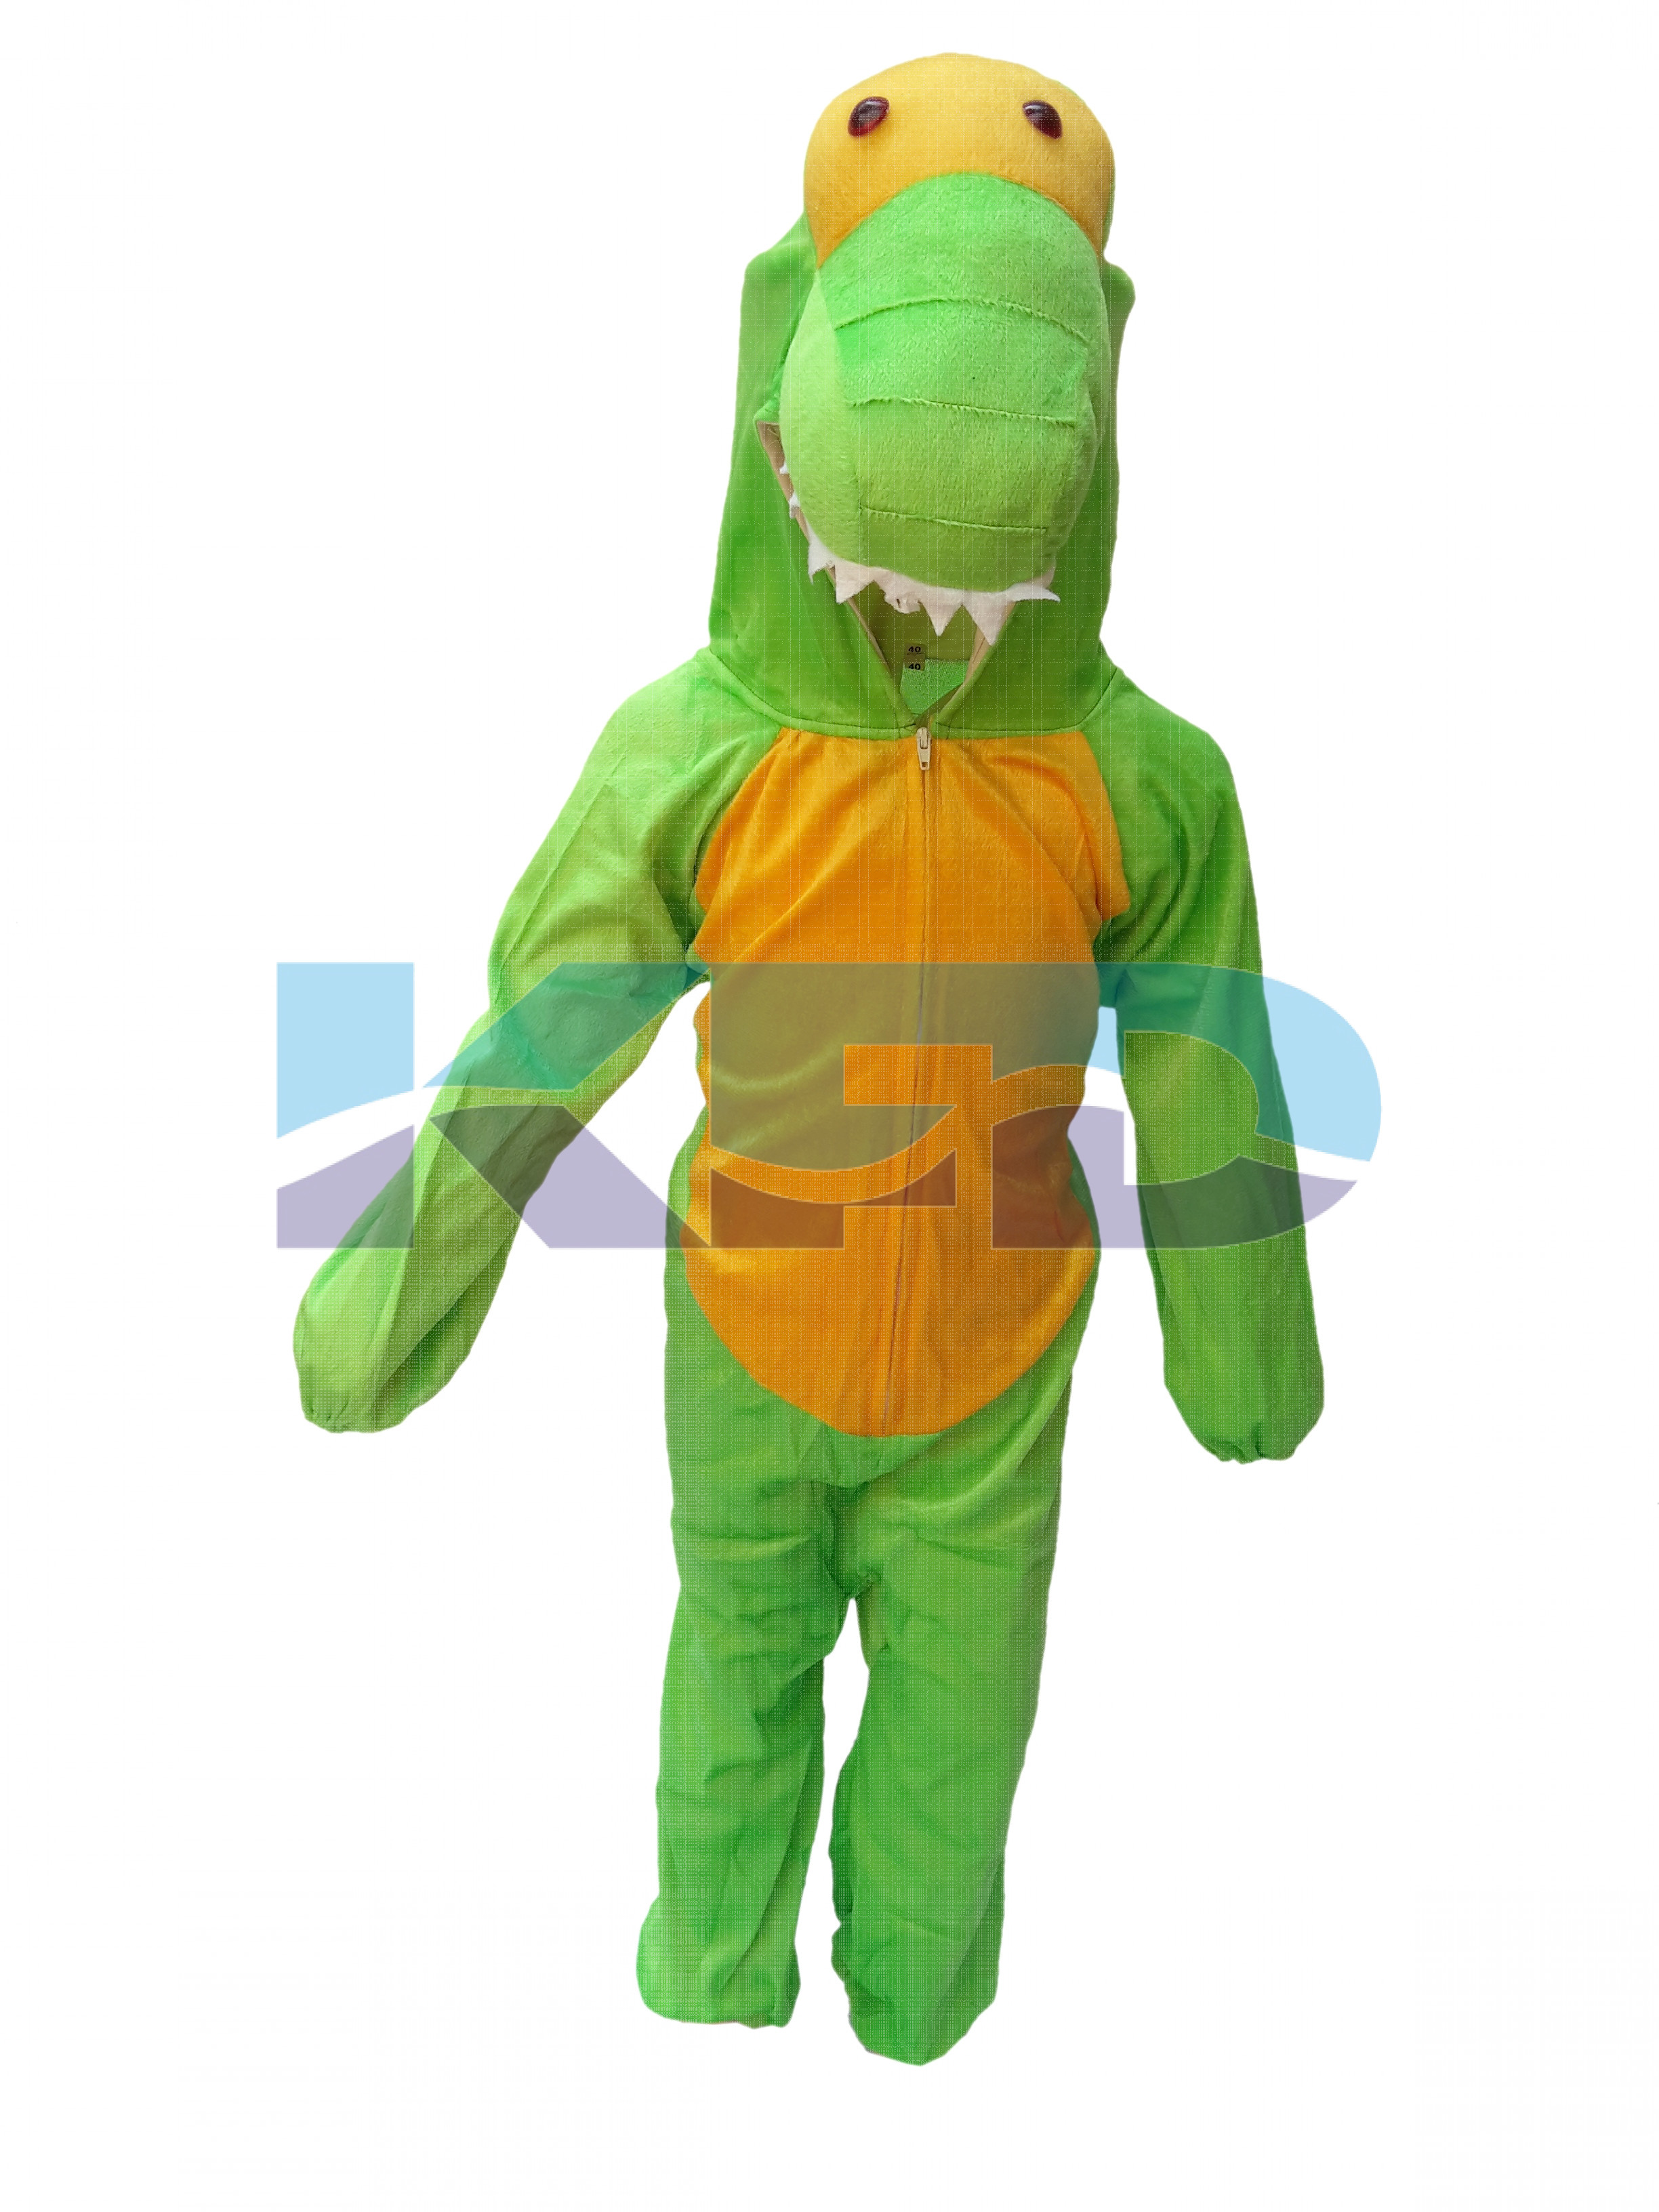 Dragon fancy dress for kids,Wild Animal Costume for School Annual function/Theme Party/Competition/Stage Shows Dress